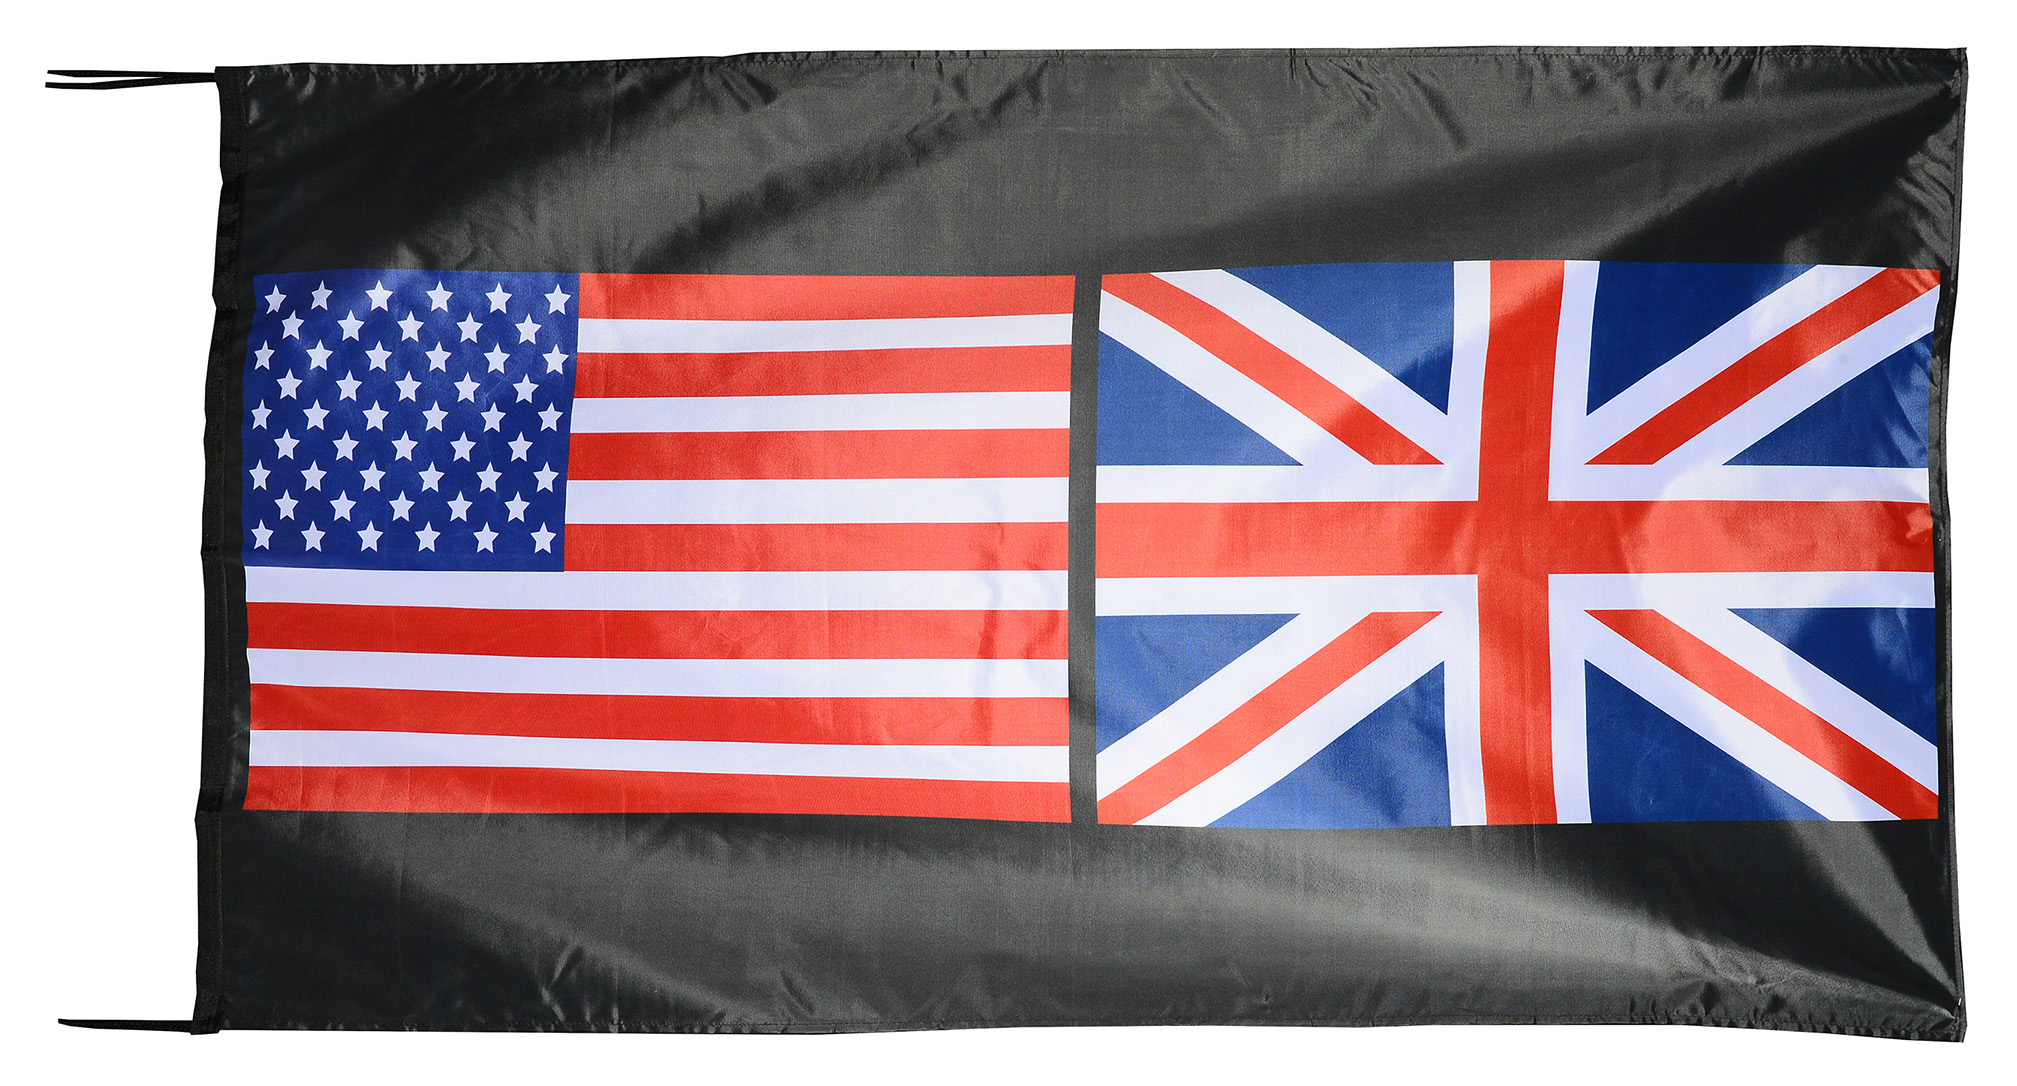 Flag  012 USA / US Country / United States Of America and Hawai State / American Patriotic / Pride Hybrid Weather-Resistant Polyester Outdoor Flag Landscape Banner / Vivid Colors / 3 X 5 FT (150 x 90cm) International Flags for Sale